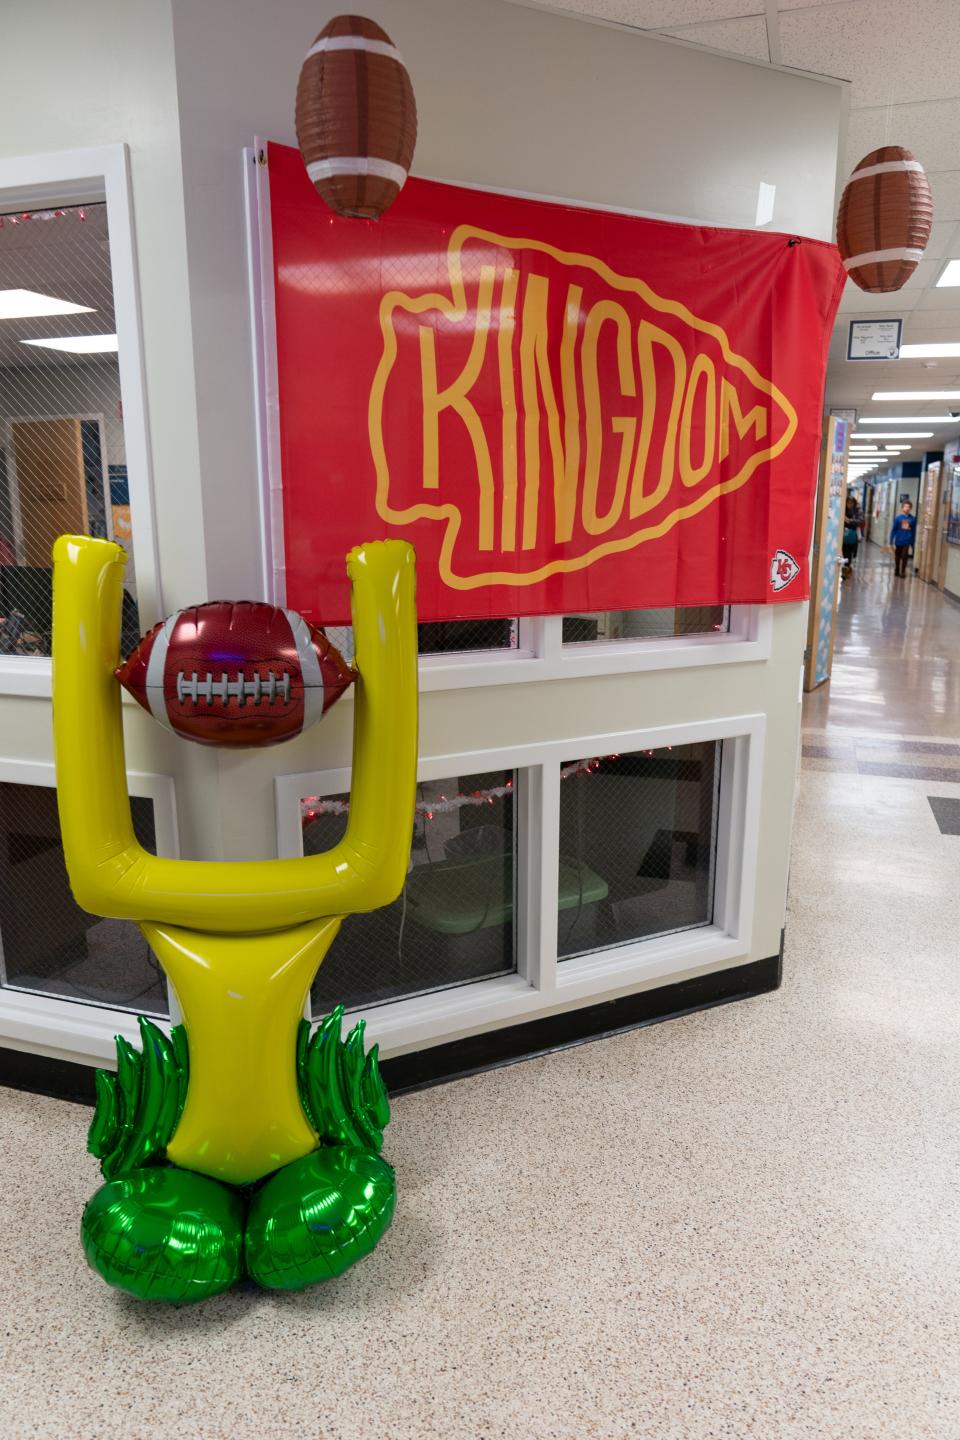 Chiefs and football-themed decorations are seen in the halls at McClure Elementary this week as the school celebrates a weeklong spirit week leading up to the Super Bowl.